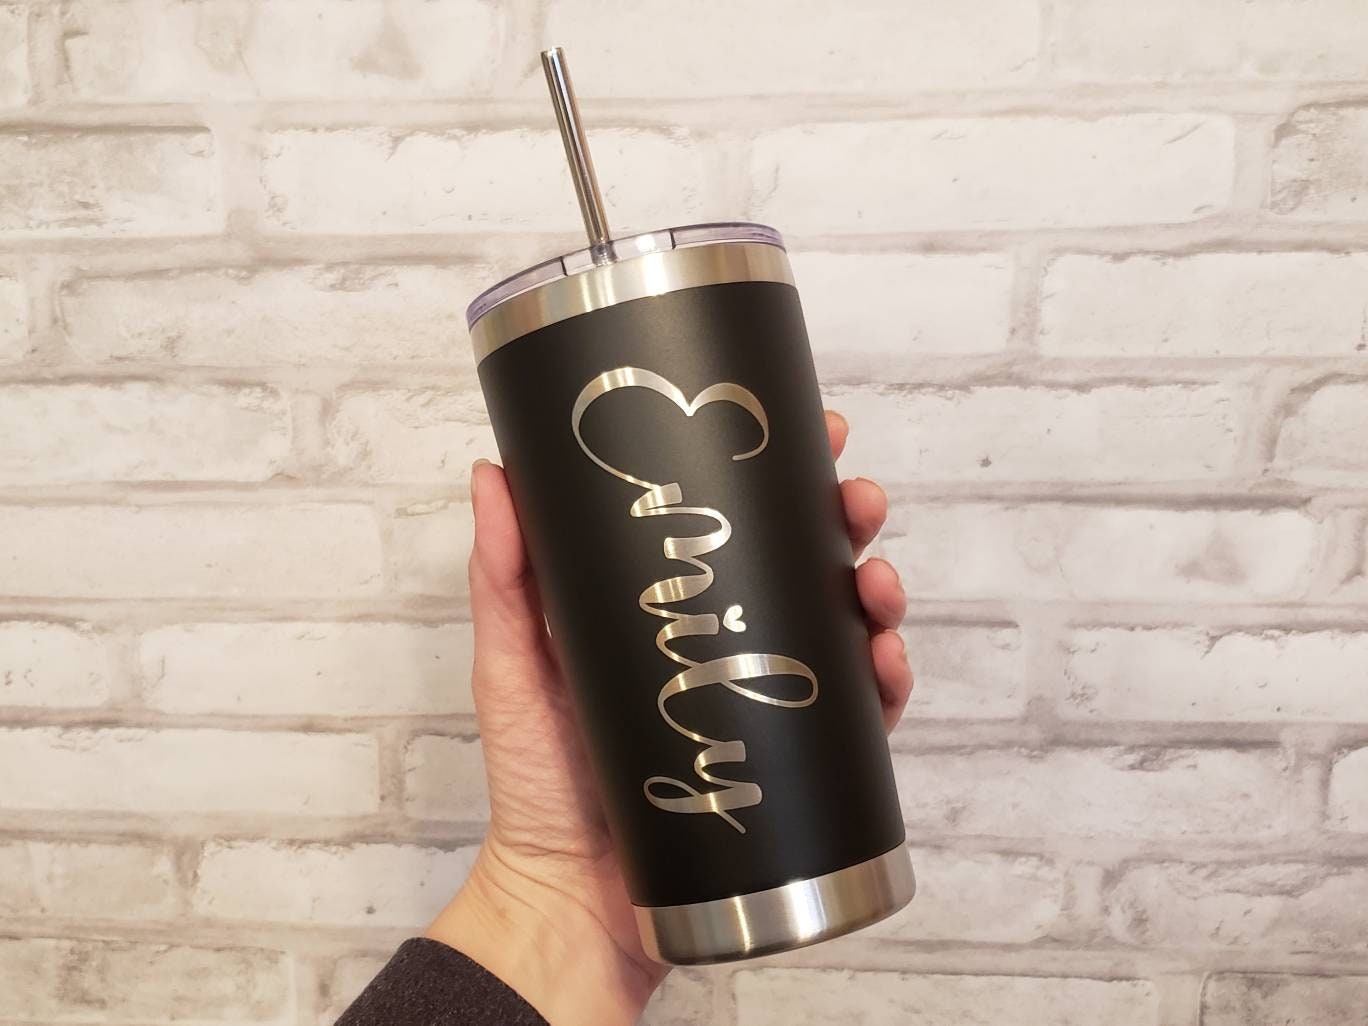 Stainless Steel Straws - Laser Engraved